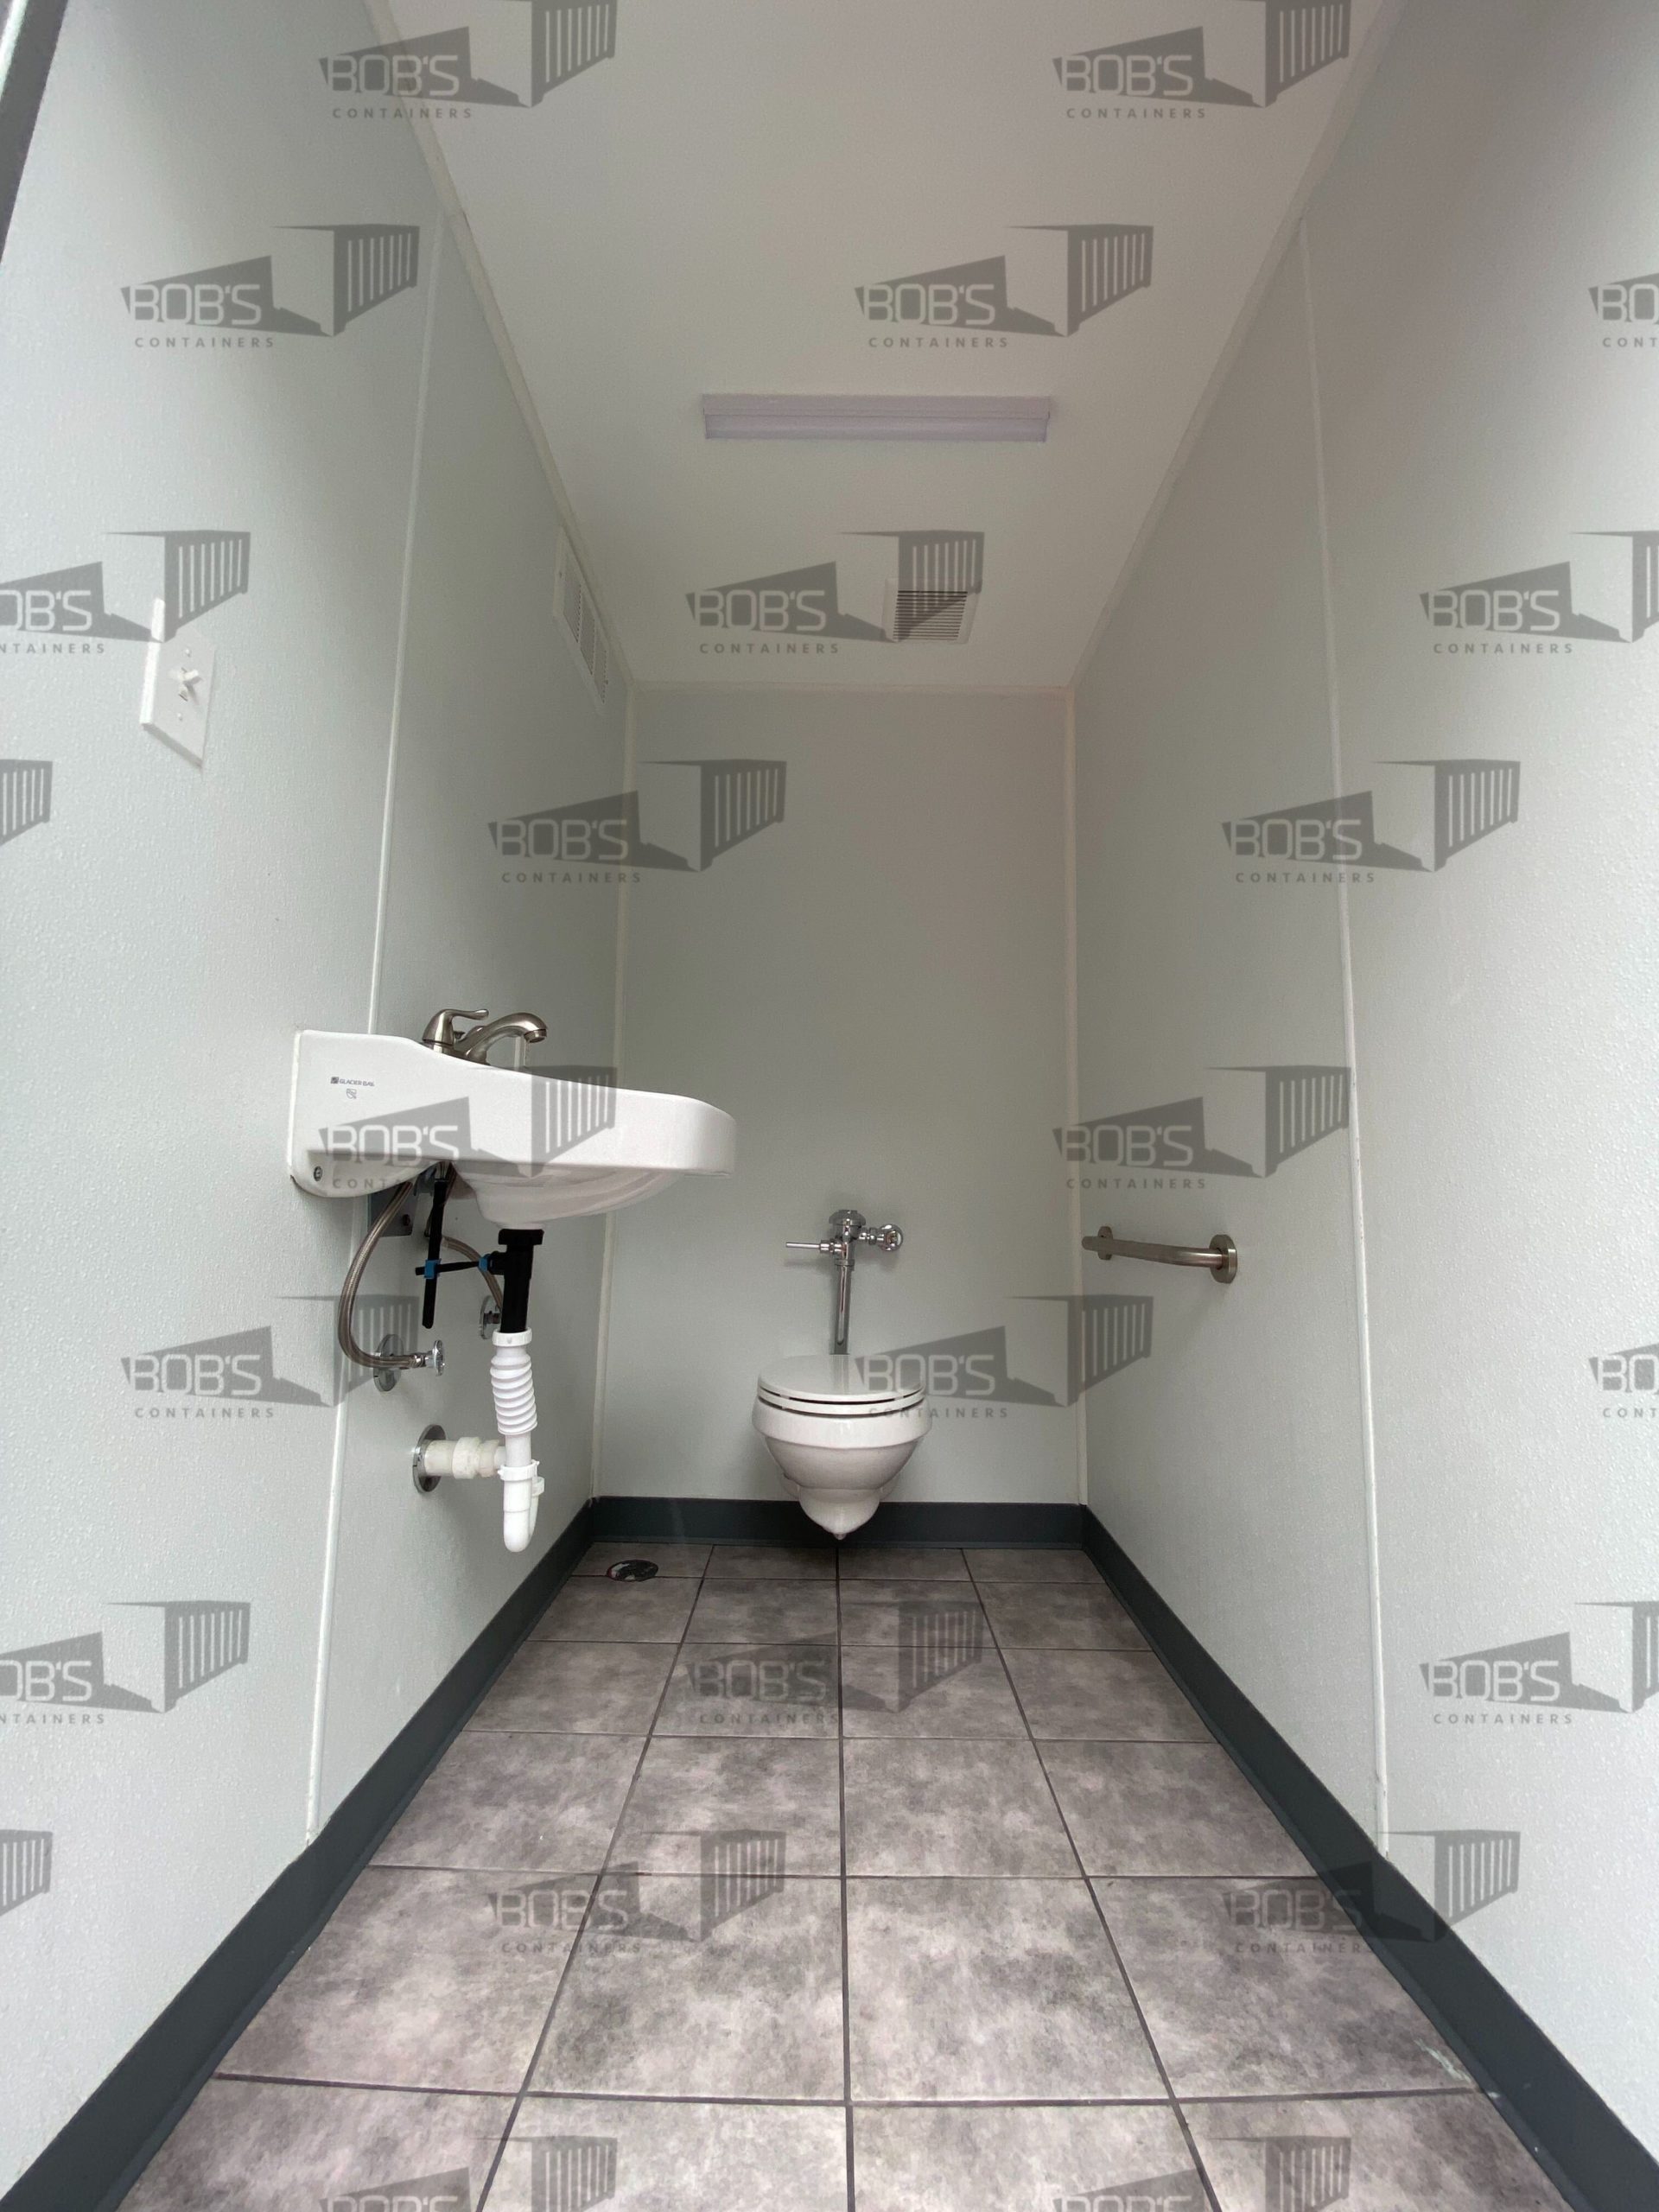 https://bobscontainers.com/wp-content/uploads/2021/11/commercial-bathroom2-scaled.jpeg